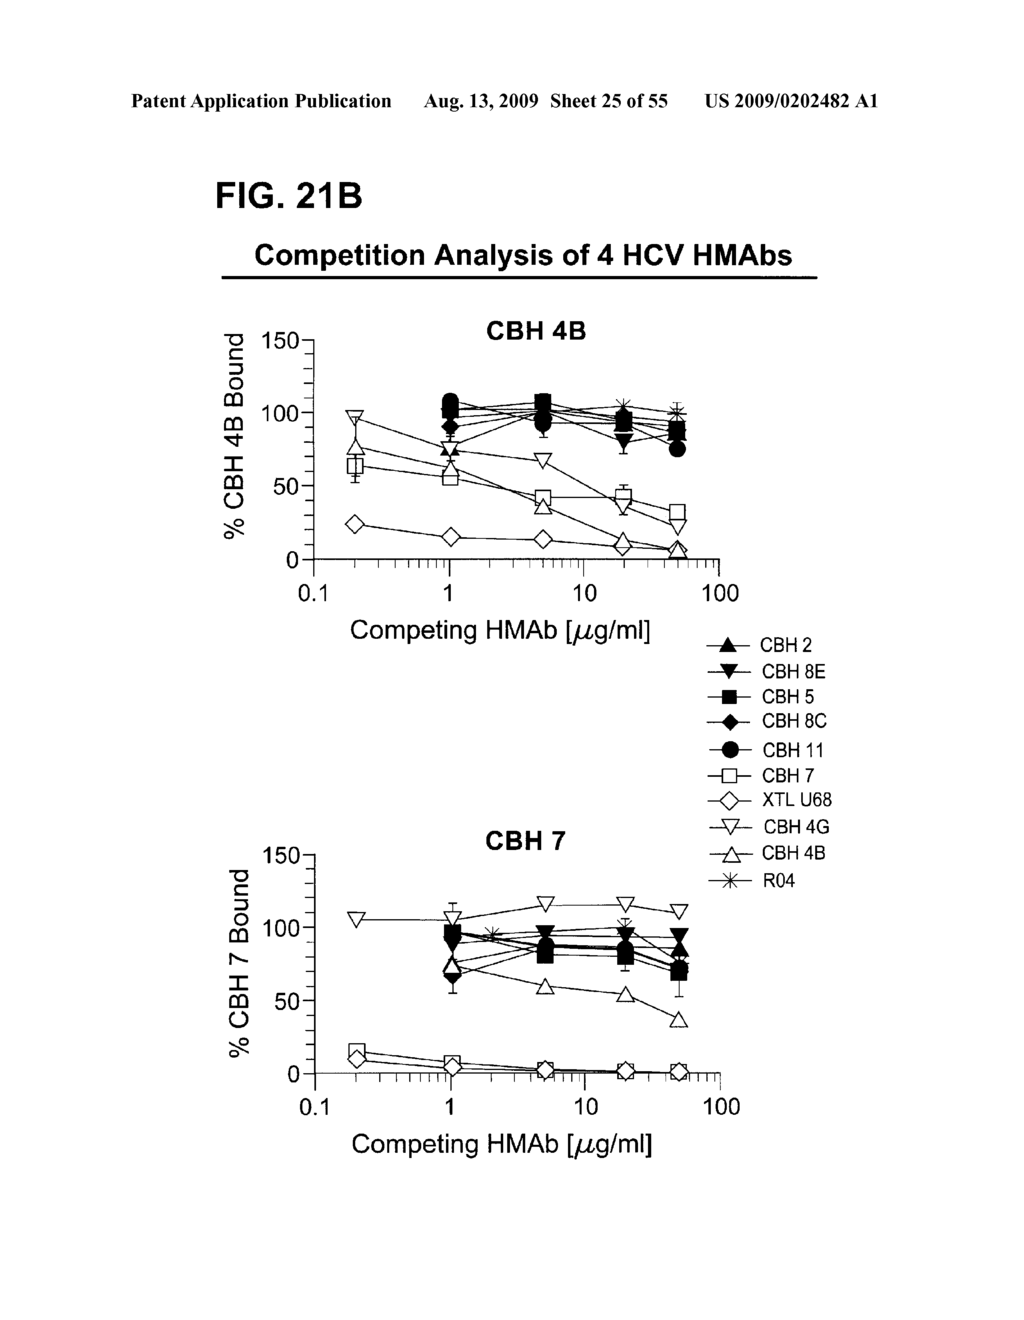 Prevention and Treatment of HCV Infection Employing Antibodies Directed Against Conformational and Linear Epitopes - diagram, schematic, and image 26